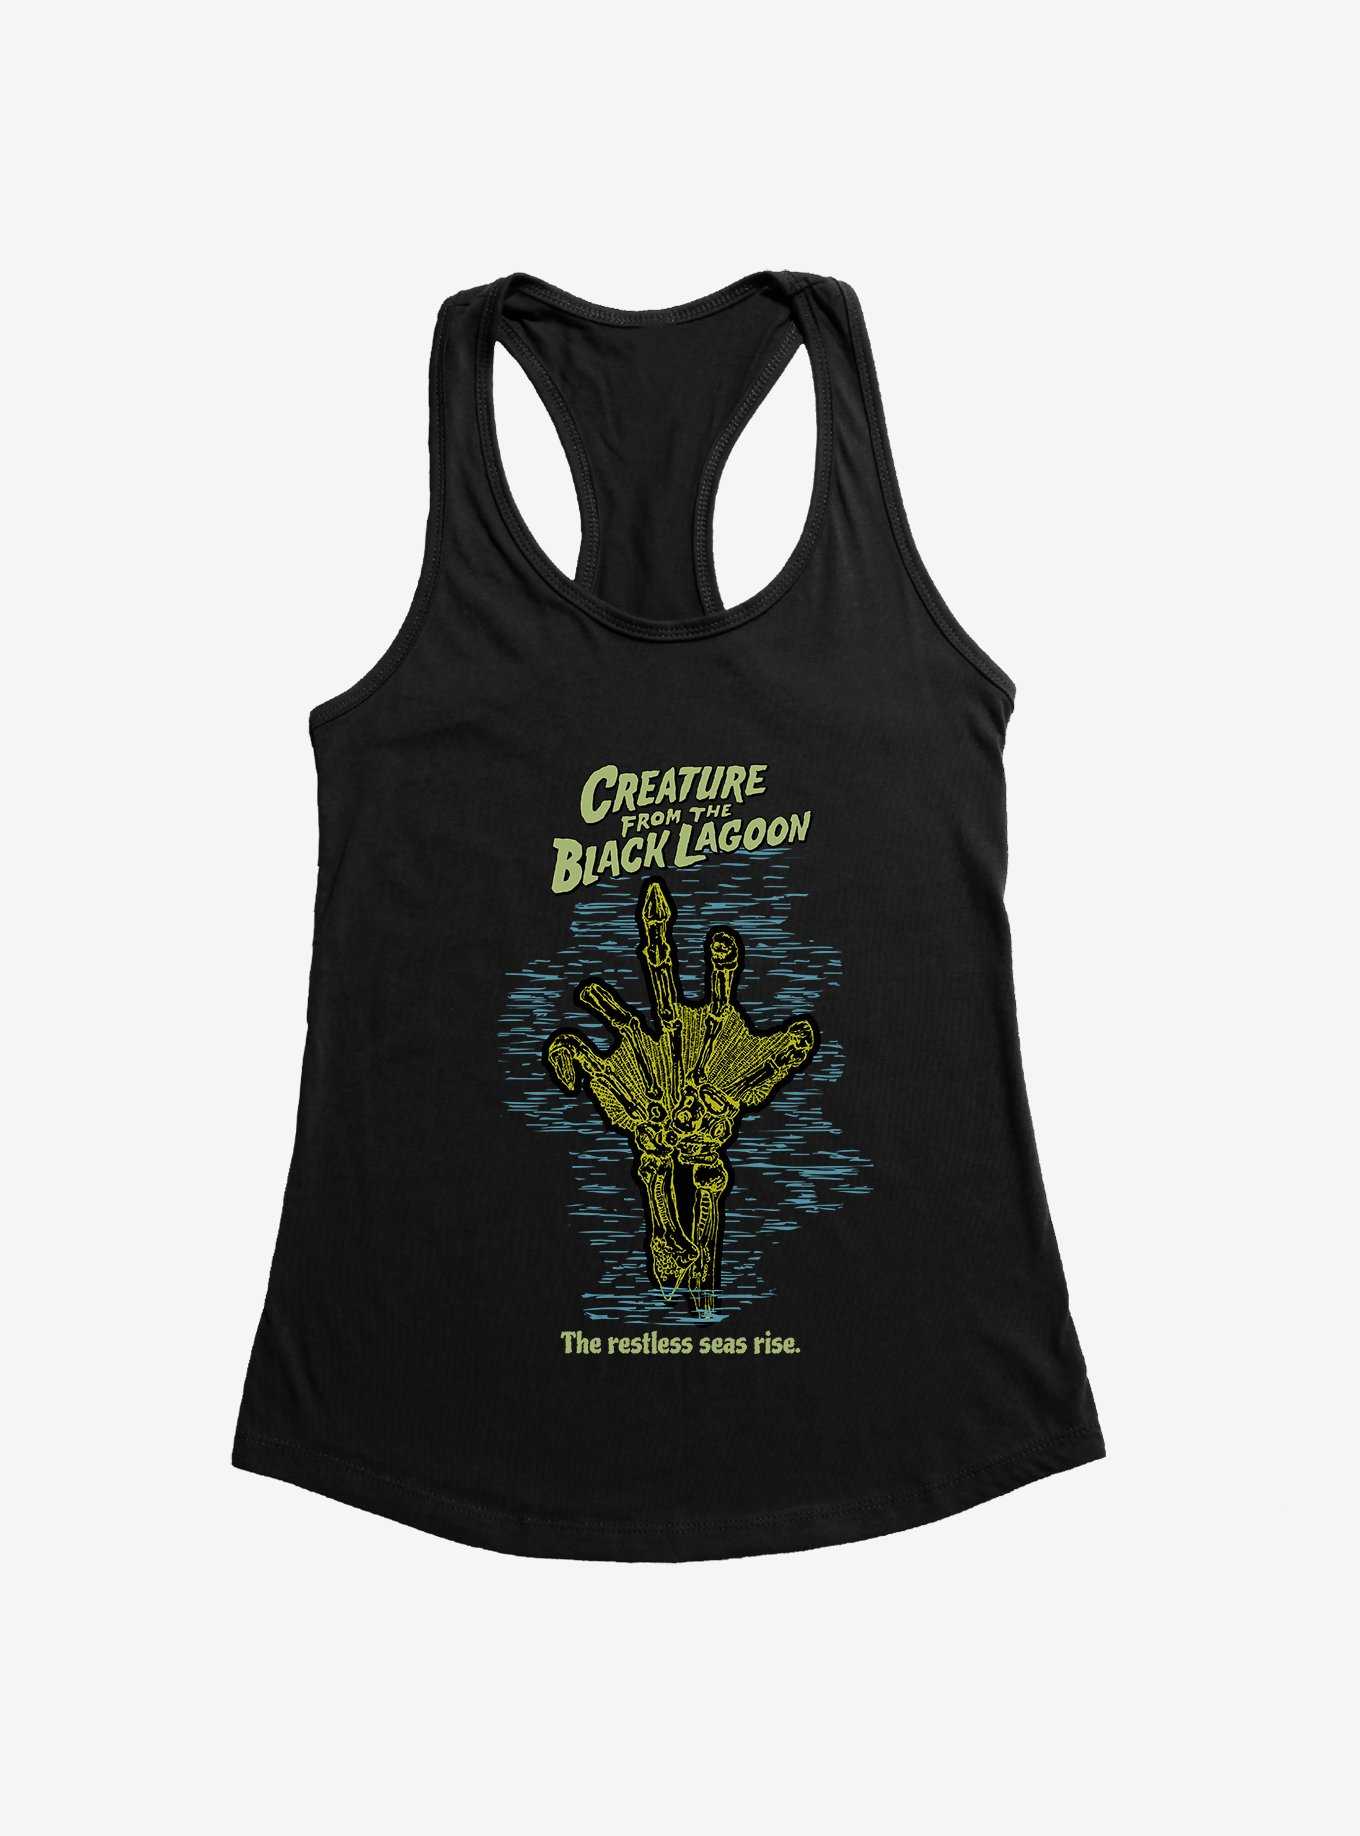 Creature From The Black Lagoon Restless Seas Rise Womens Tank Top, , hi-res